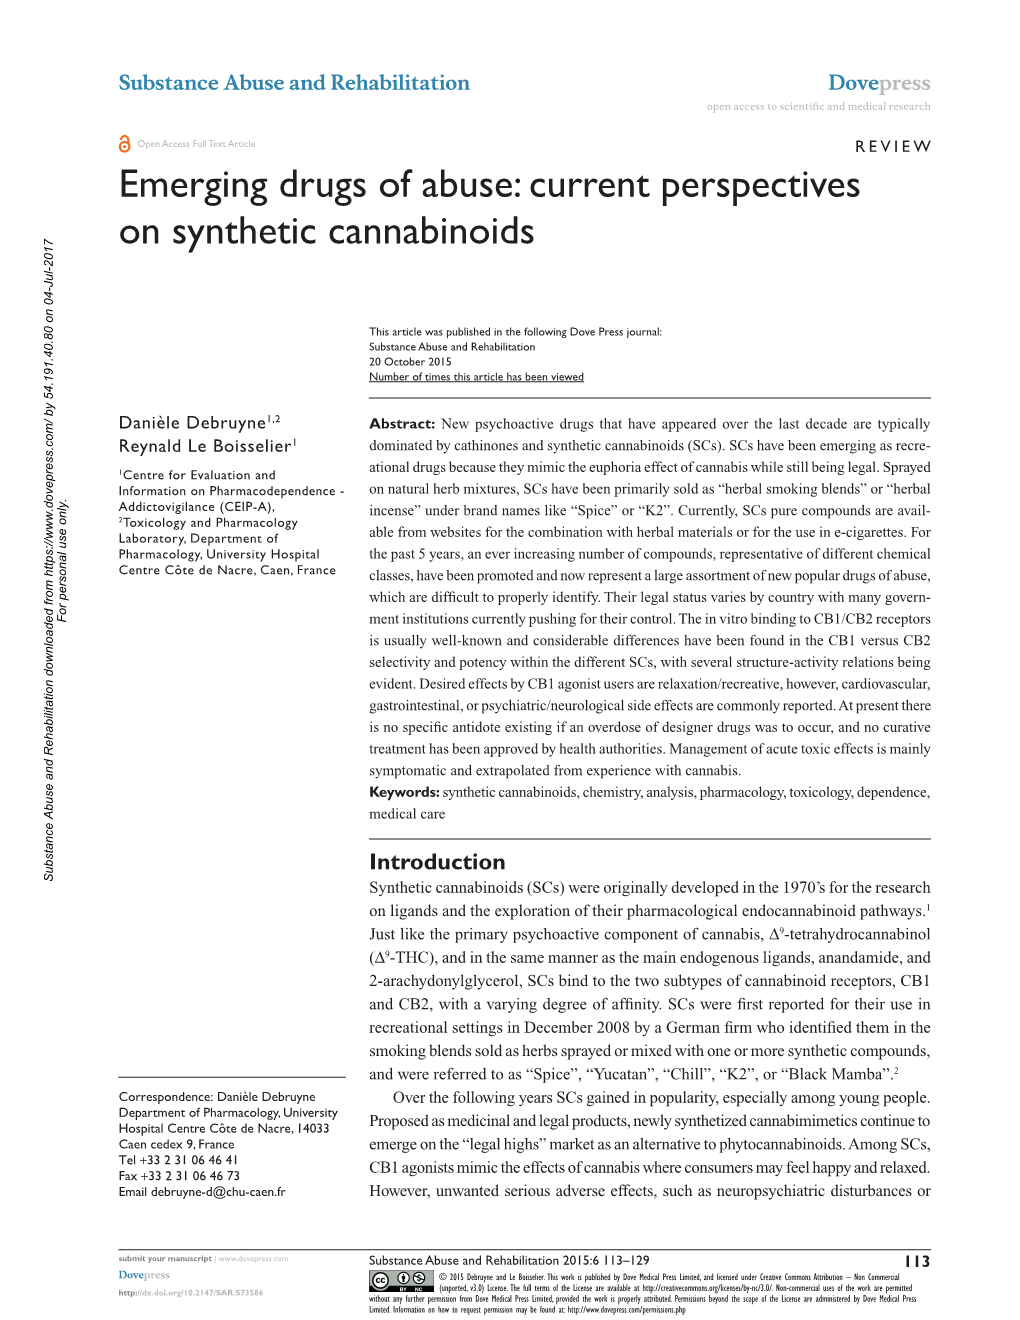 Current Perspectives on Synthetic Cannabinoids